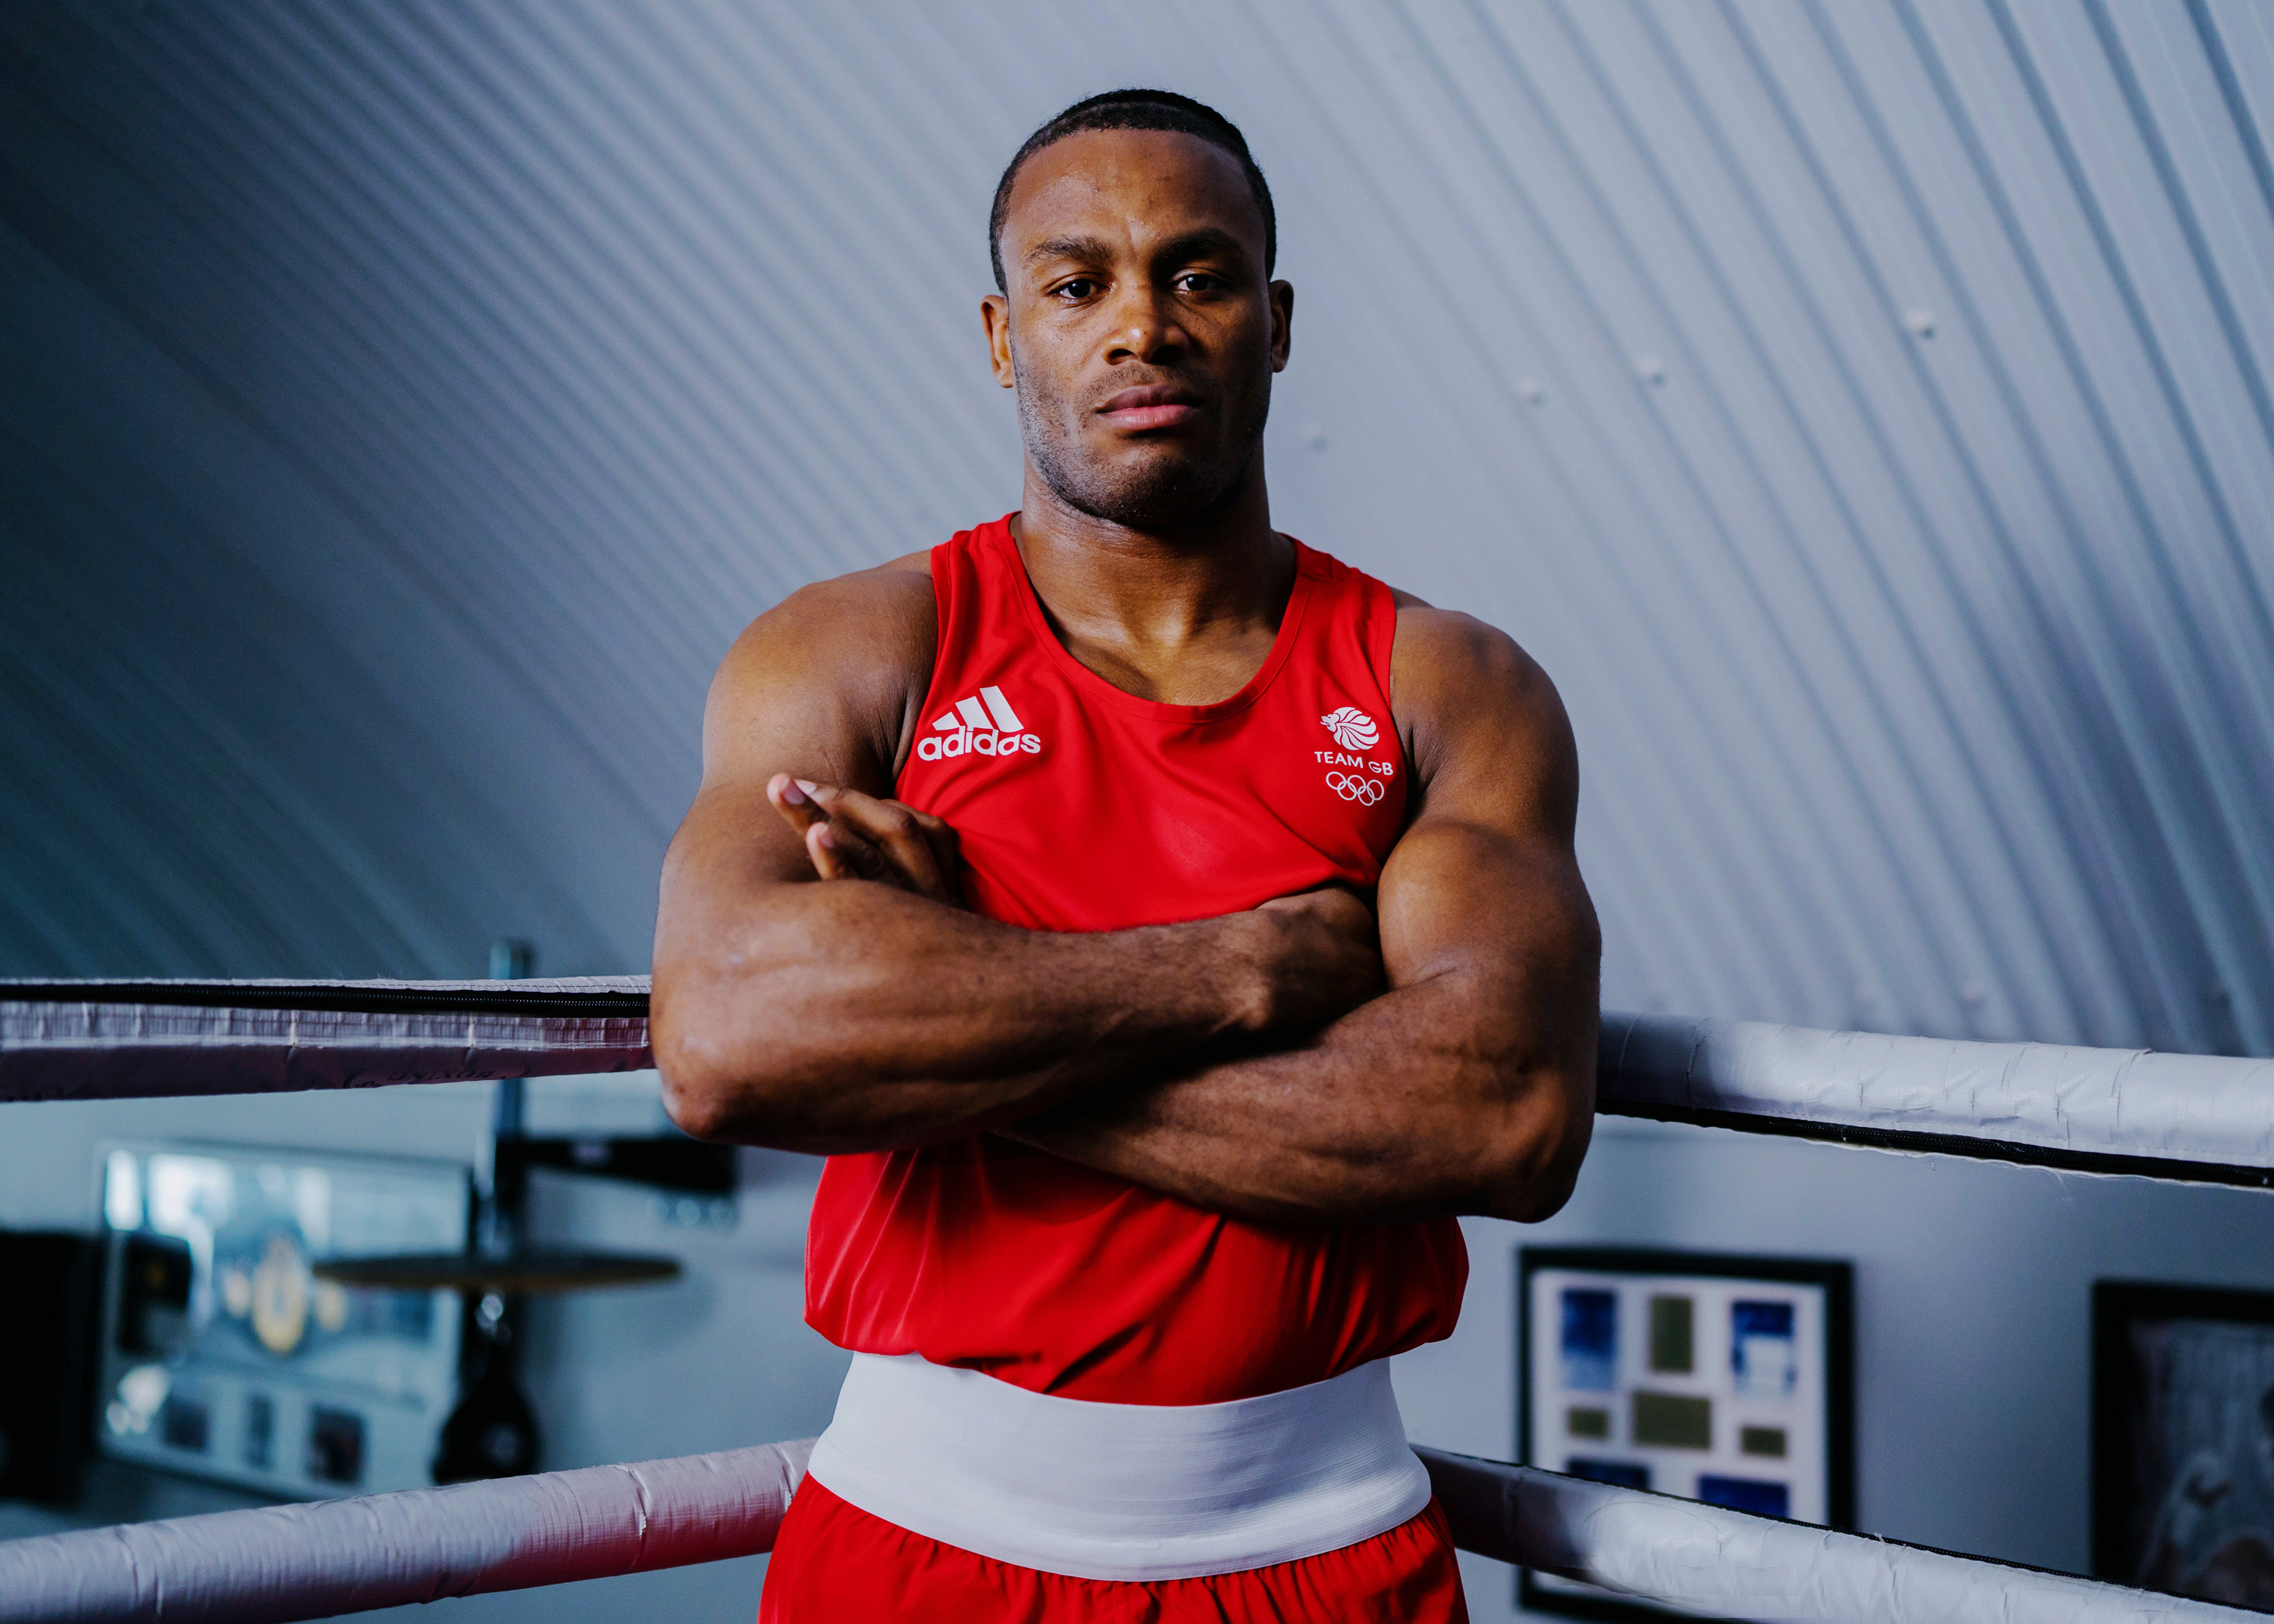 Cheavon Clarke weighing up move into professional boxing as he contends with mixed emotions from Tokyo 2020